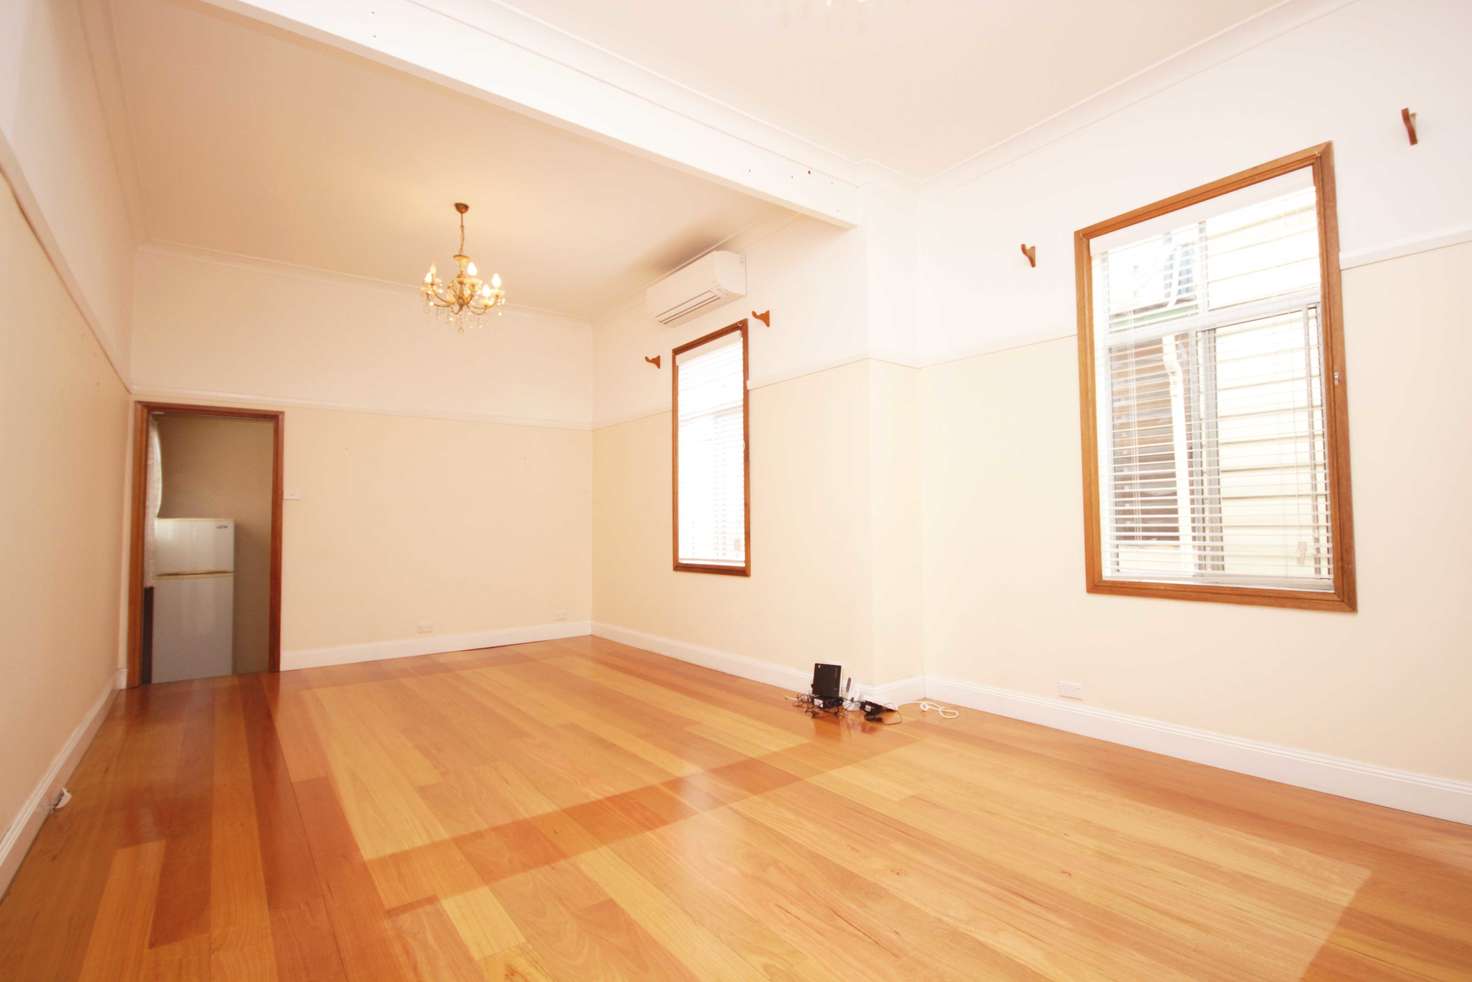 Main view of Homely house listing, 34 Barden St, Tempe NSW 2044